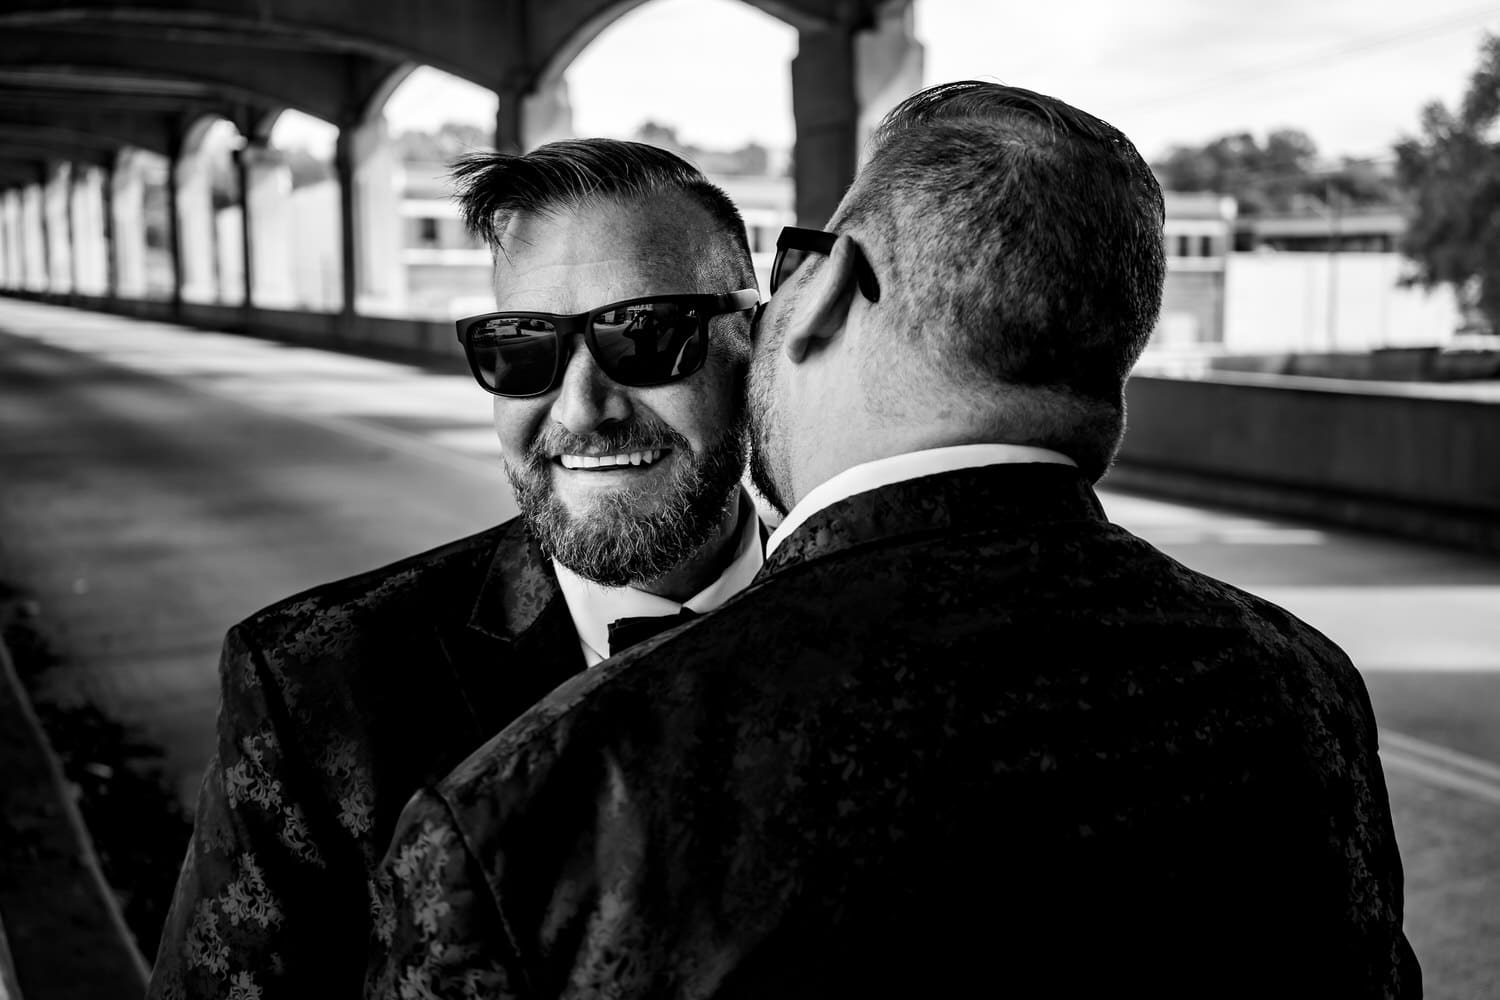 A candid black and white picture of a groom laughing and whispering into his groom's ear, Kansas City's West Bottoms neighborhood visible behind them. 